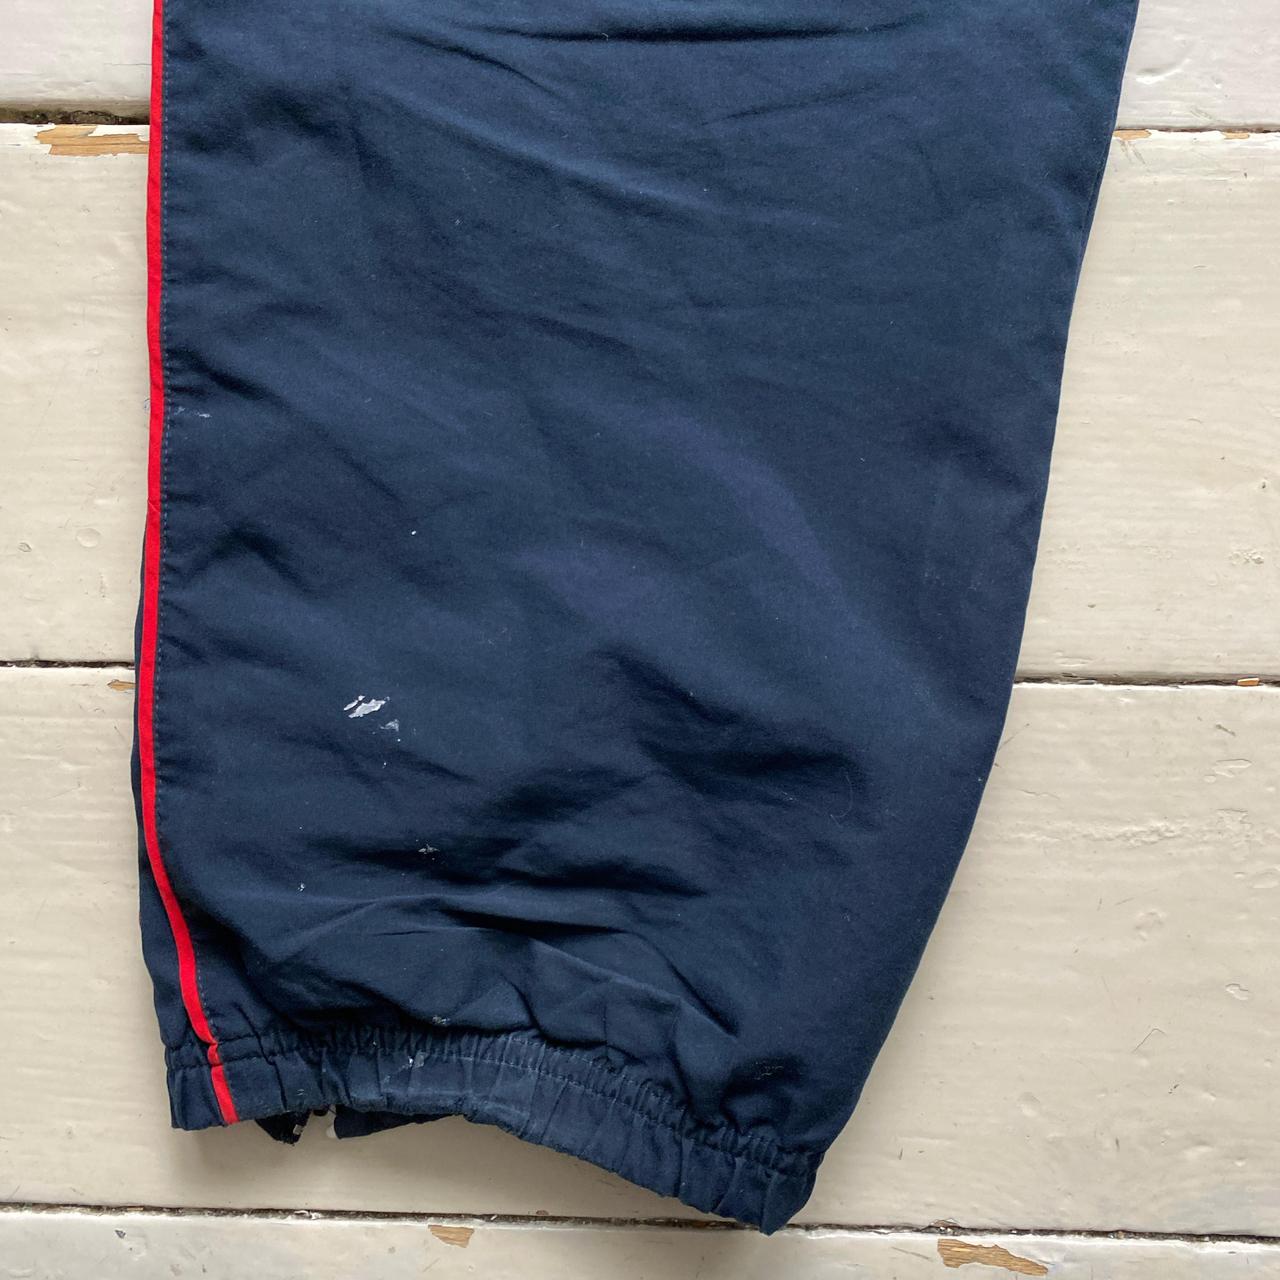 Reebok Vintage Navy White and Red Shell Baggy Trackpant Bottoms